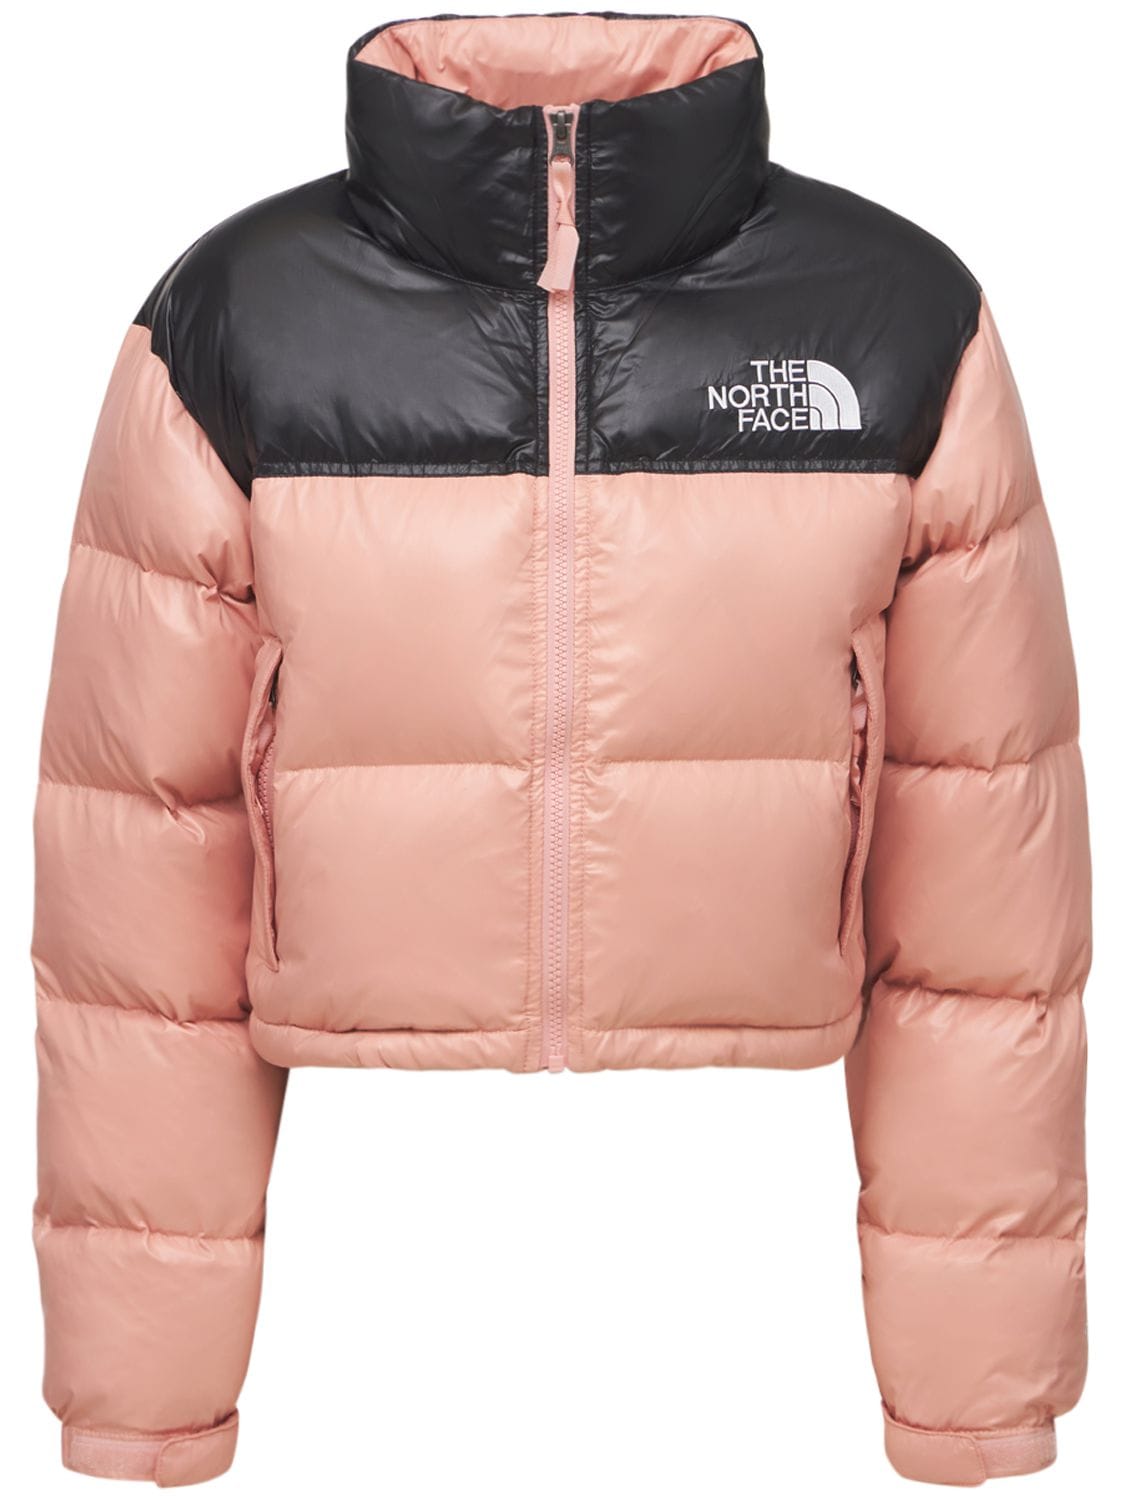 THE NORTH FACE NUPTSE CROPPED DOWN JACKET,74IDOM004-MEXB0